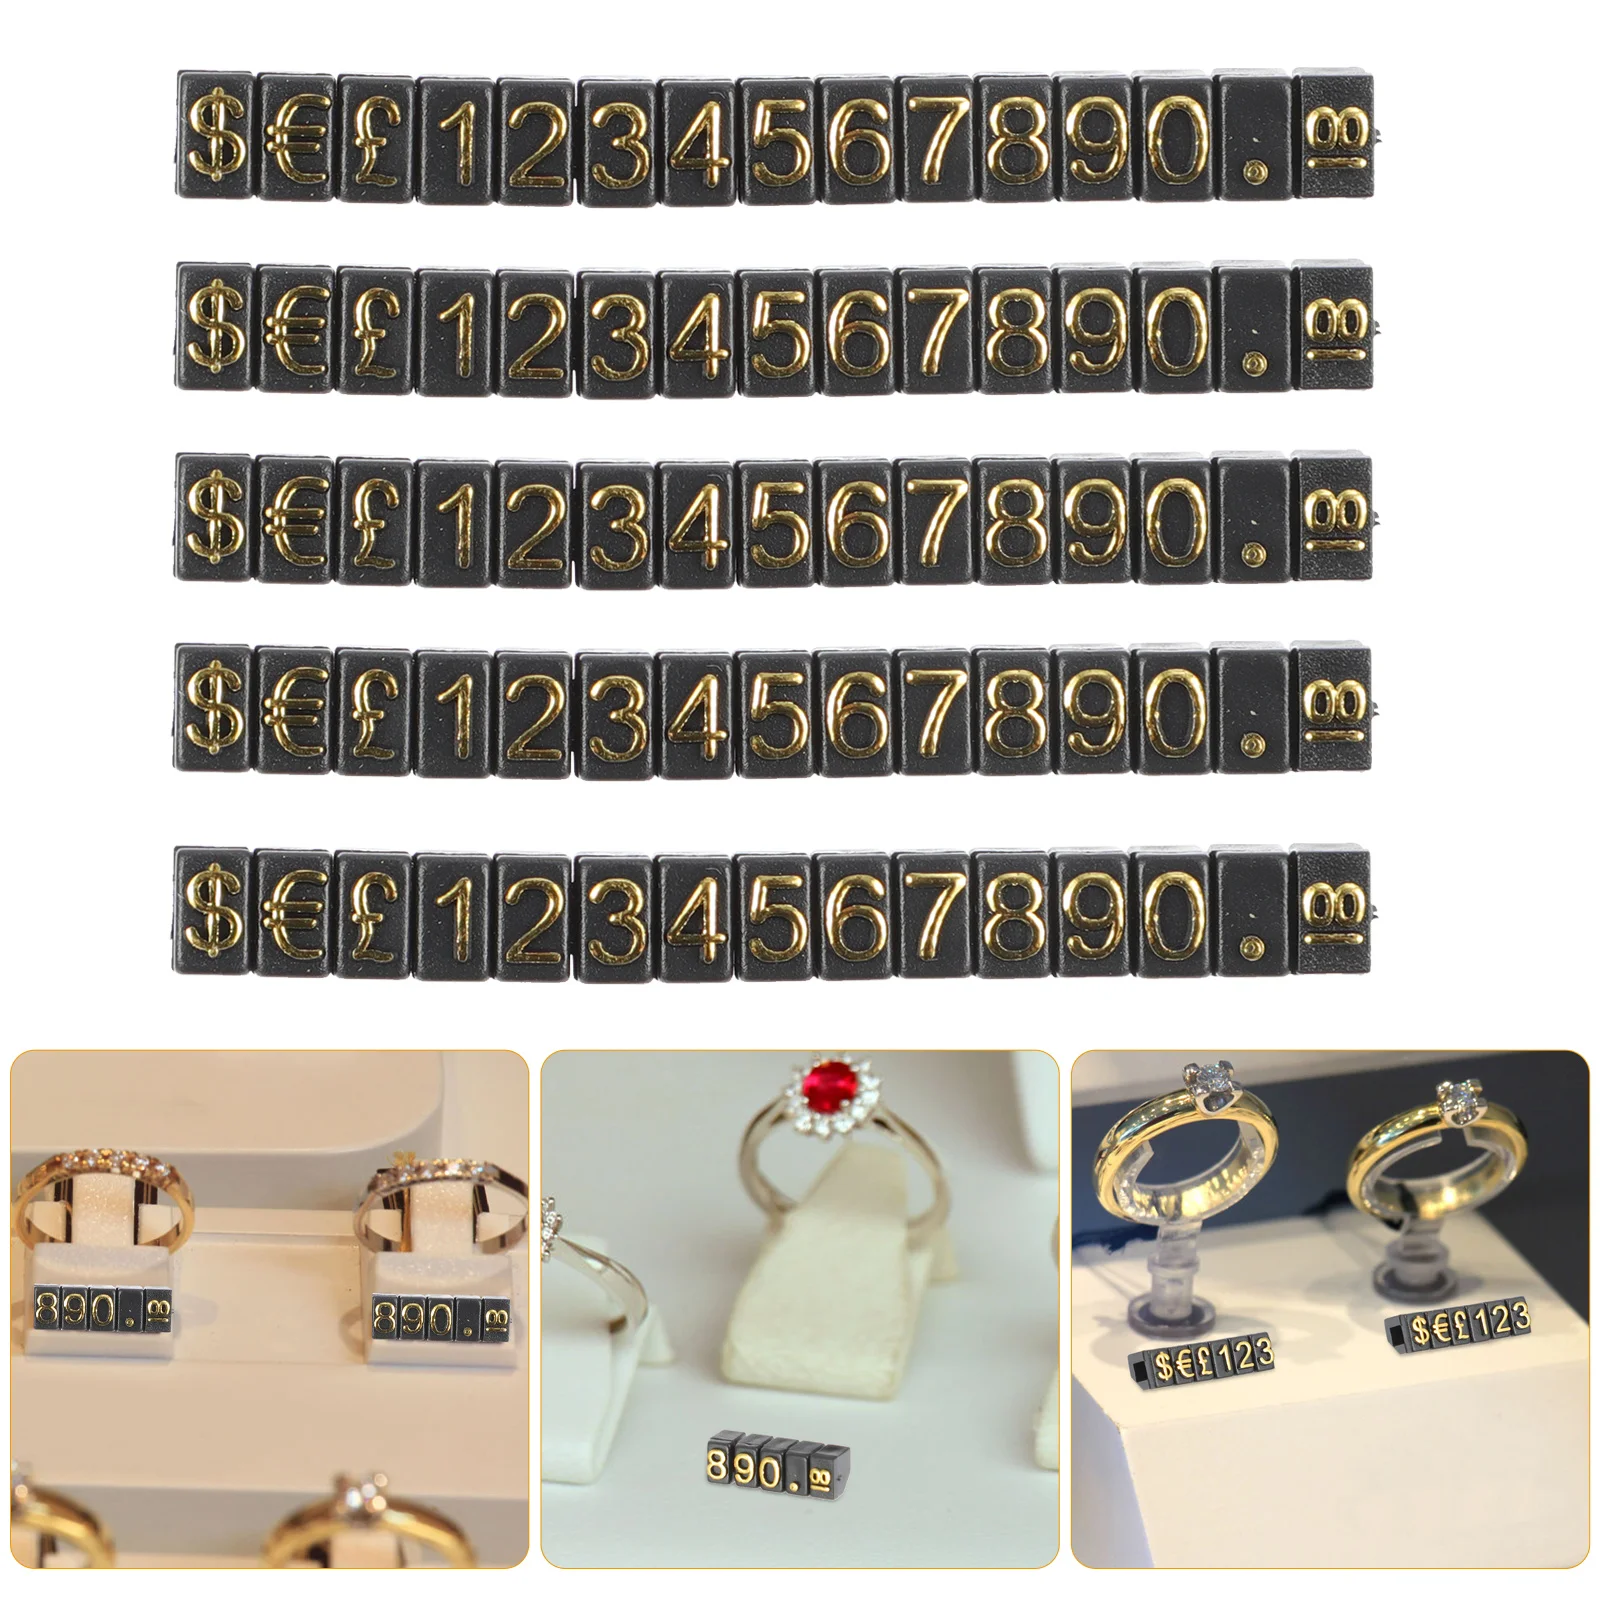 

10 Pcs Price Tag Digital Sign Tags Numbers Jewelry Labels Store Plastic Supermarket Display Boards Shopping Mall Signs